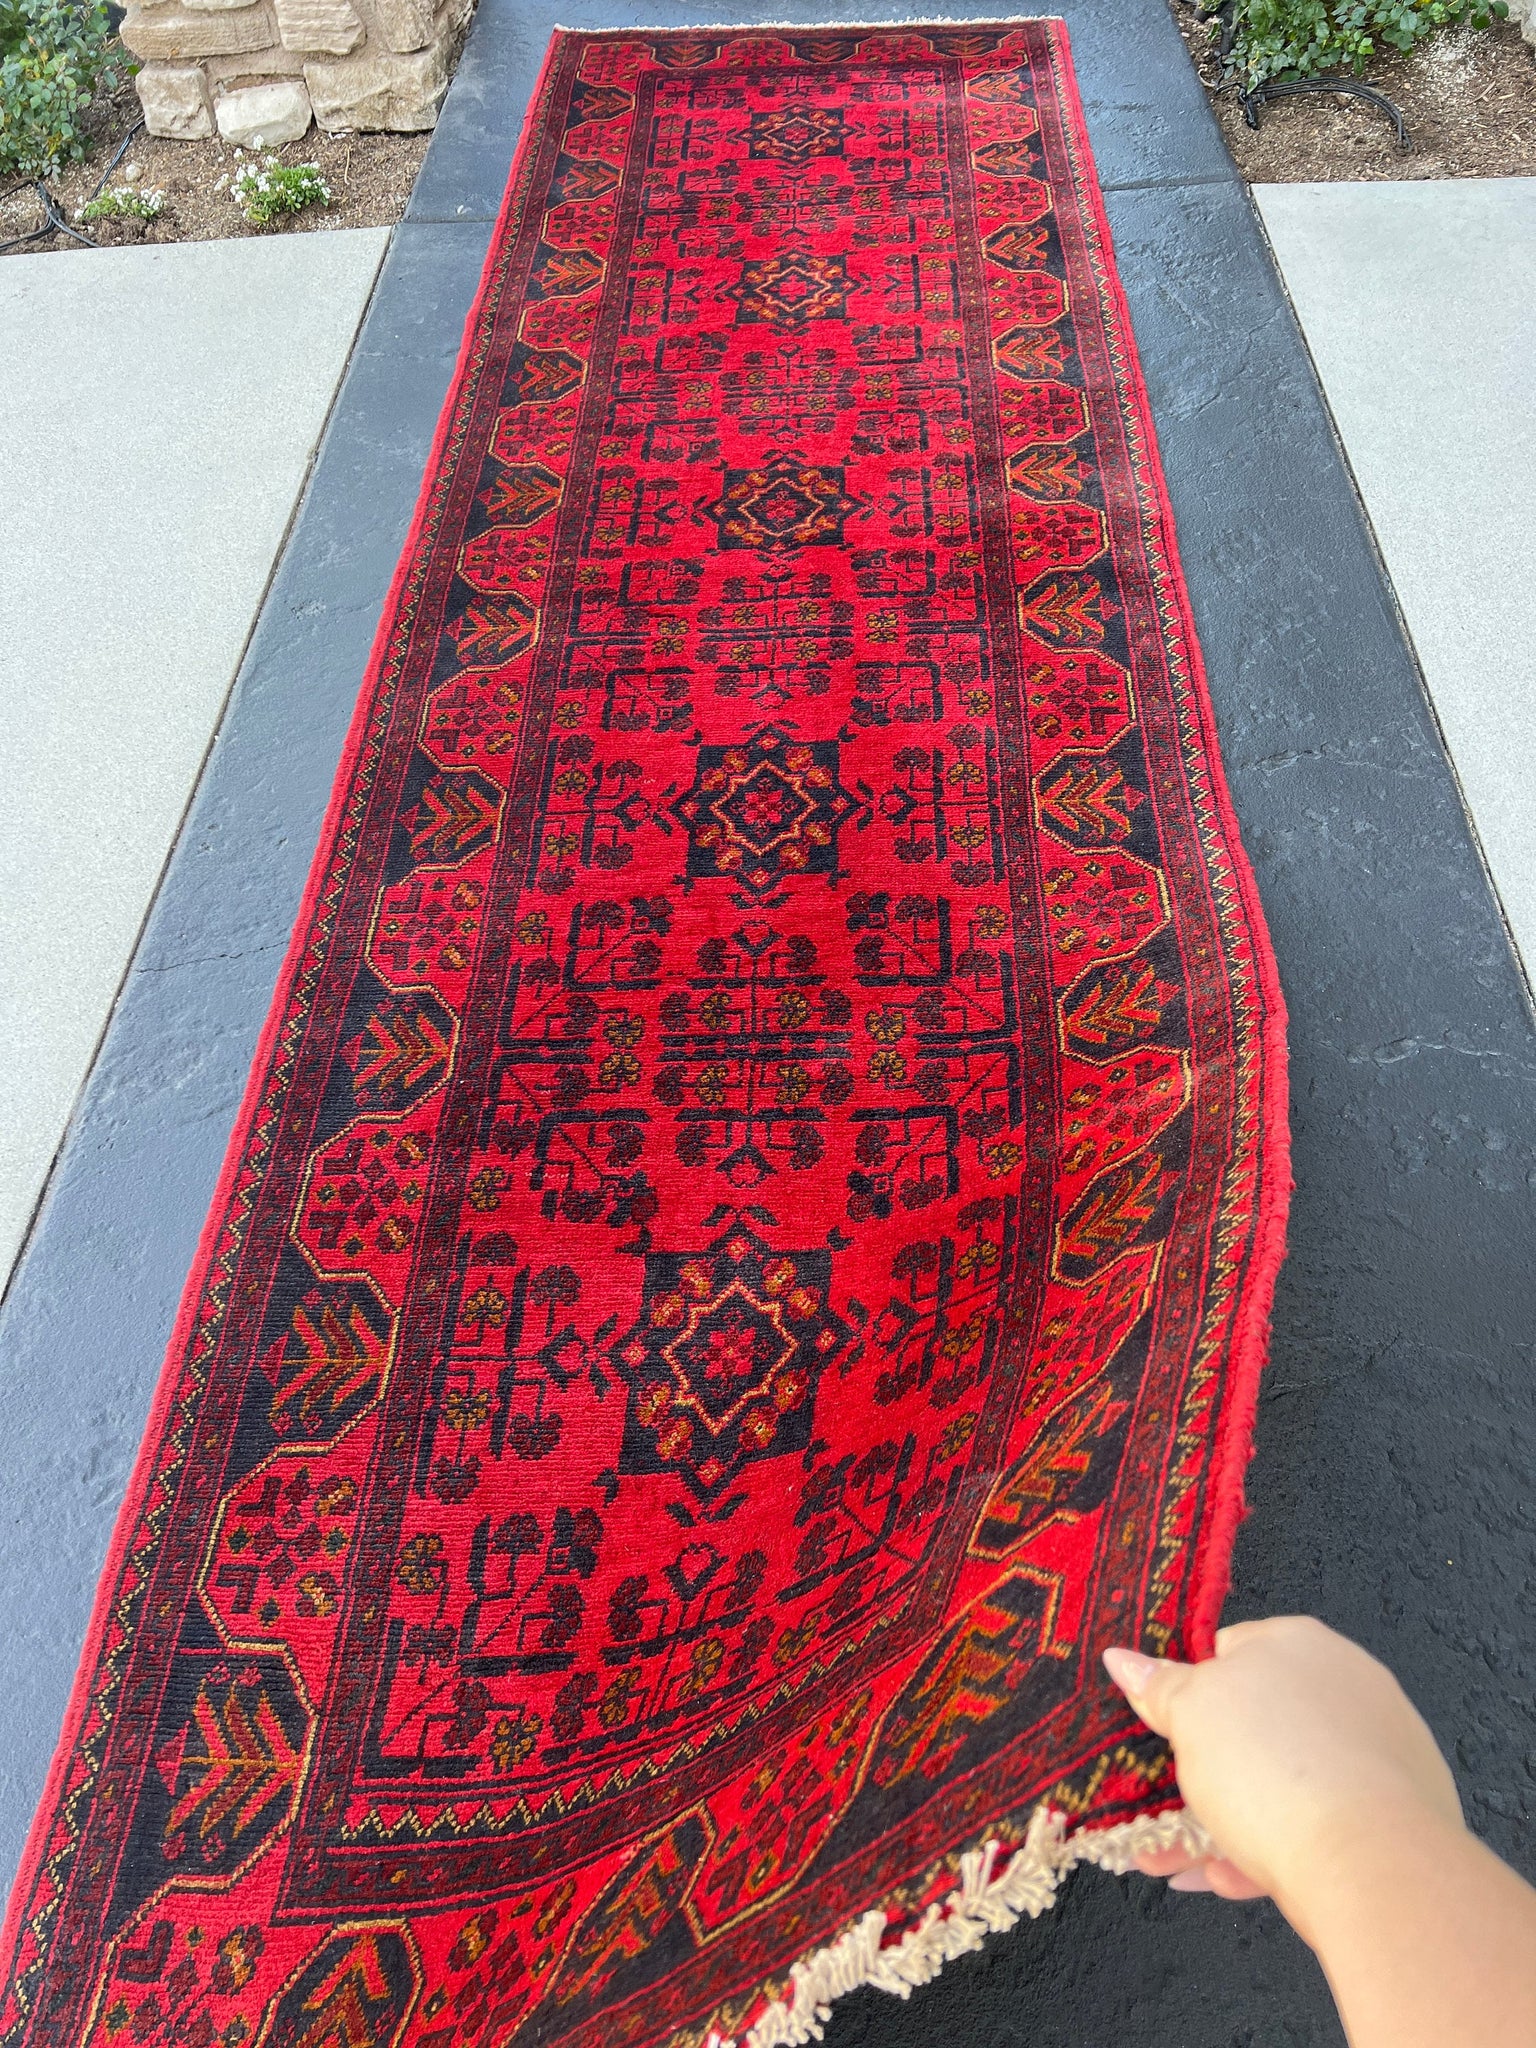 3x10 (90x305) Handmade Afghan Runner Rug | Brick Blood Red Black Burnt Orange Gold Yellow | Hand Knotted Persian Floral Turkish Wool